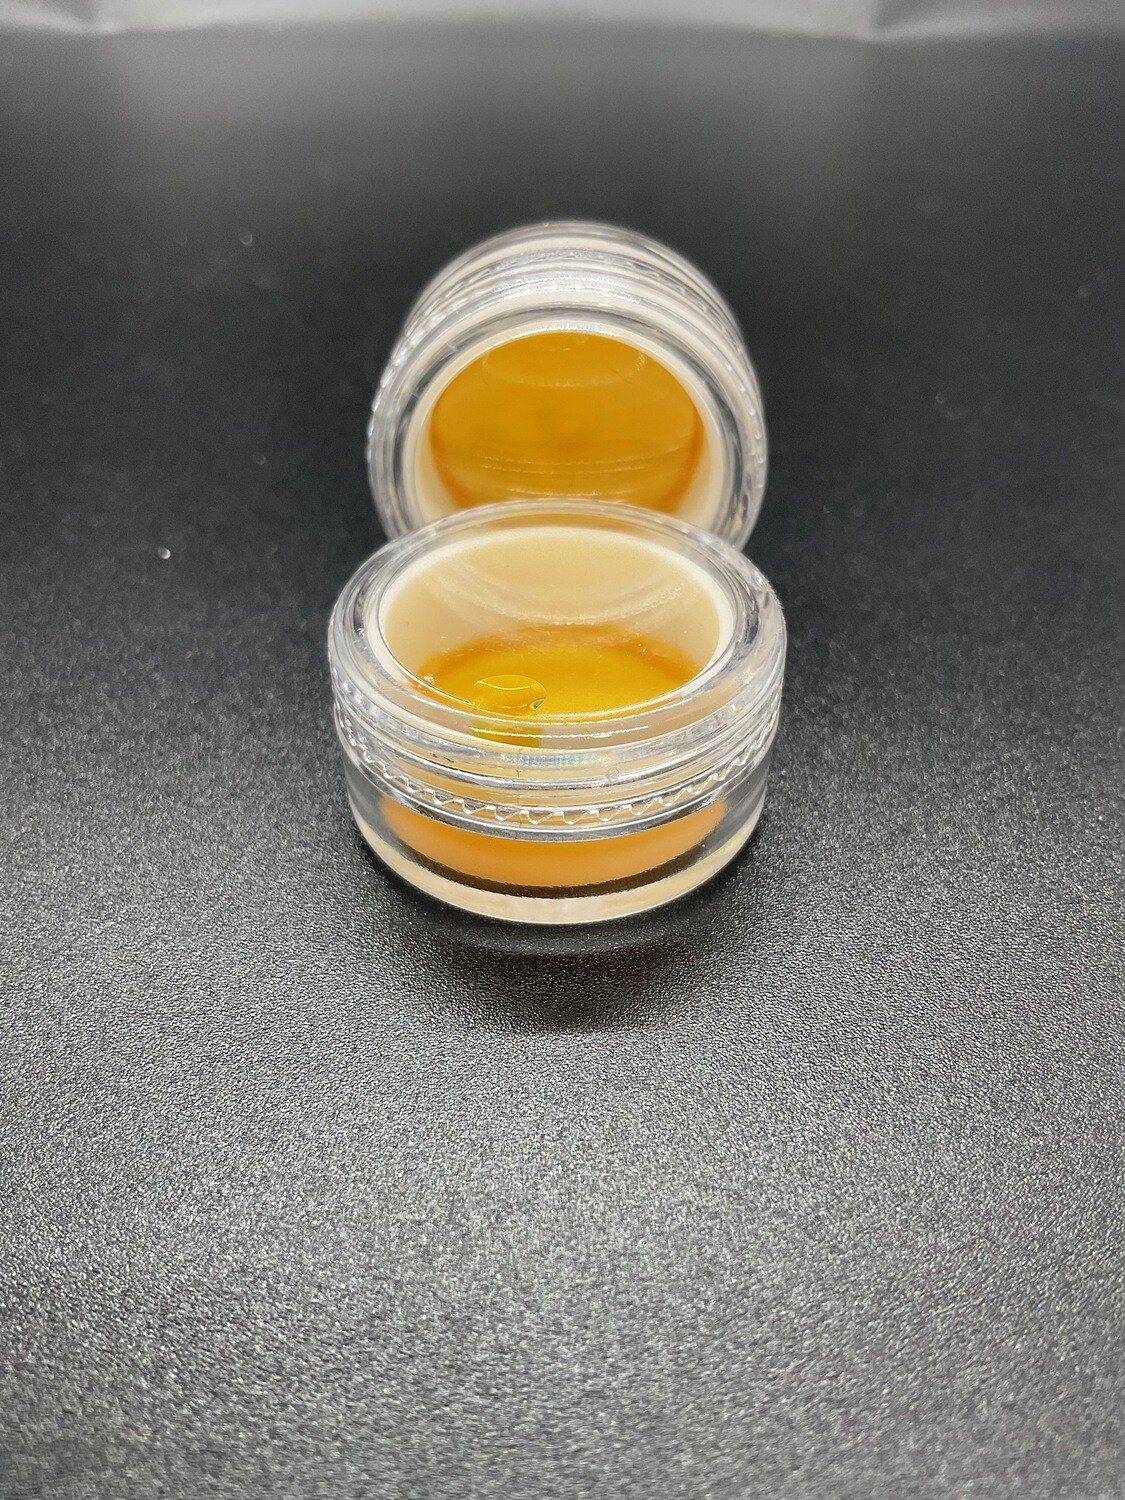 D8 Shatter Gelato Concentrate